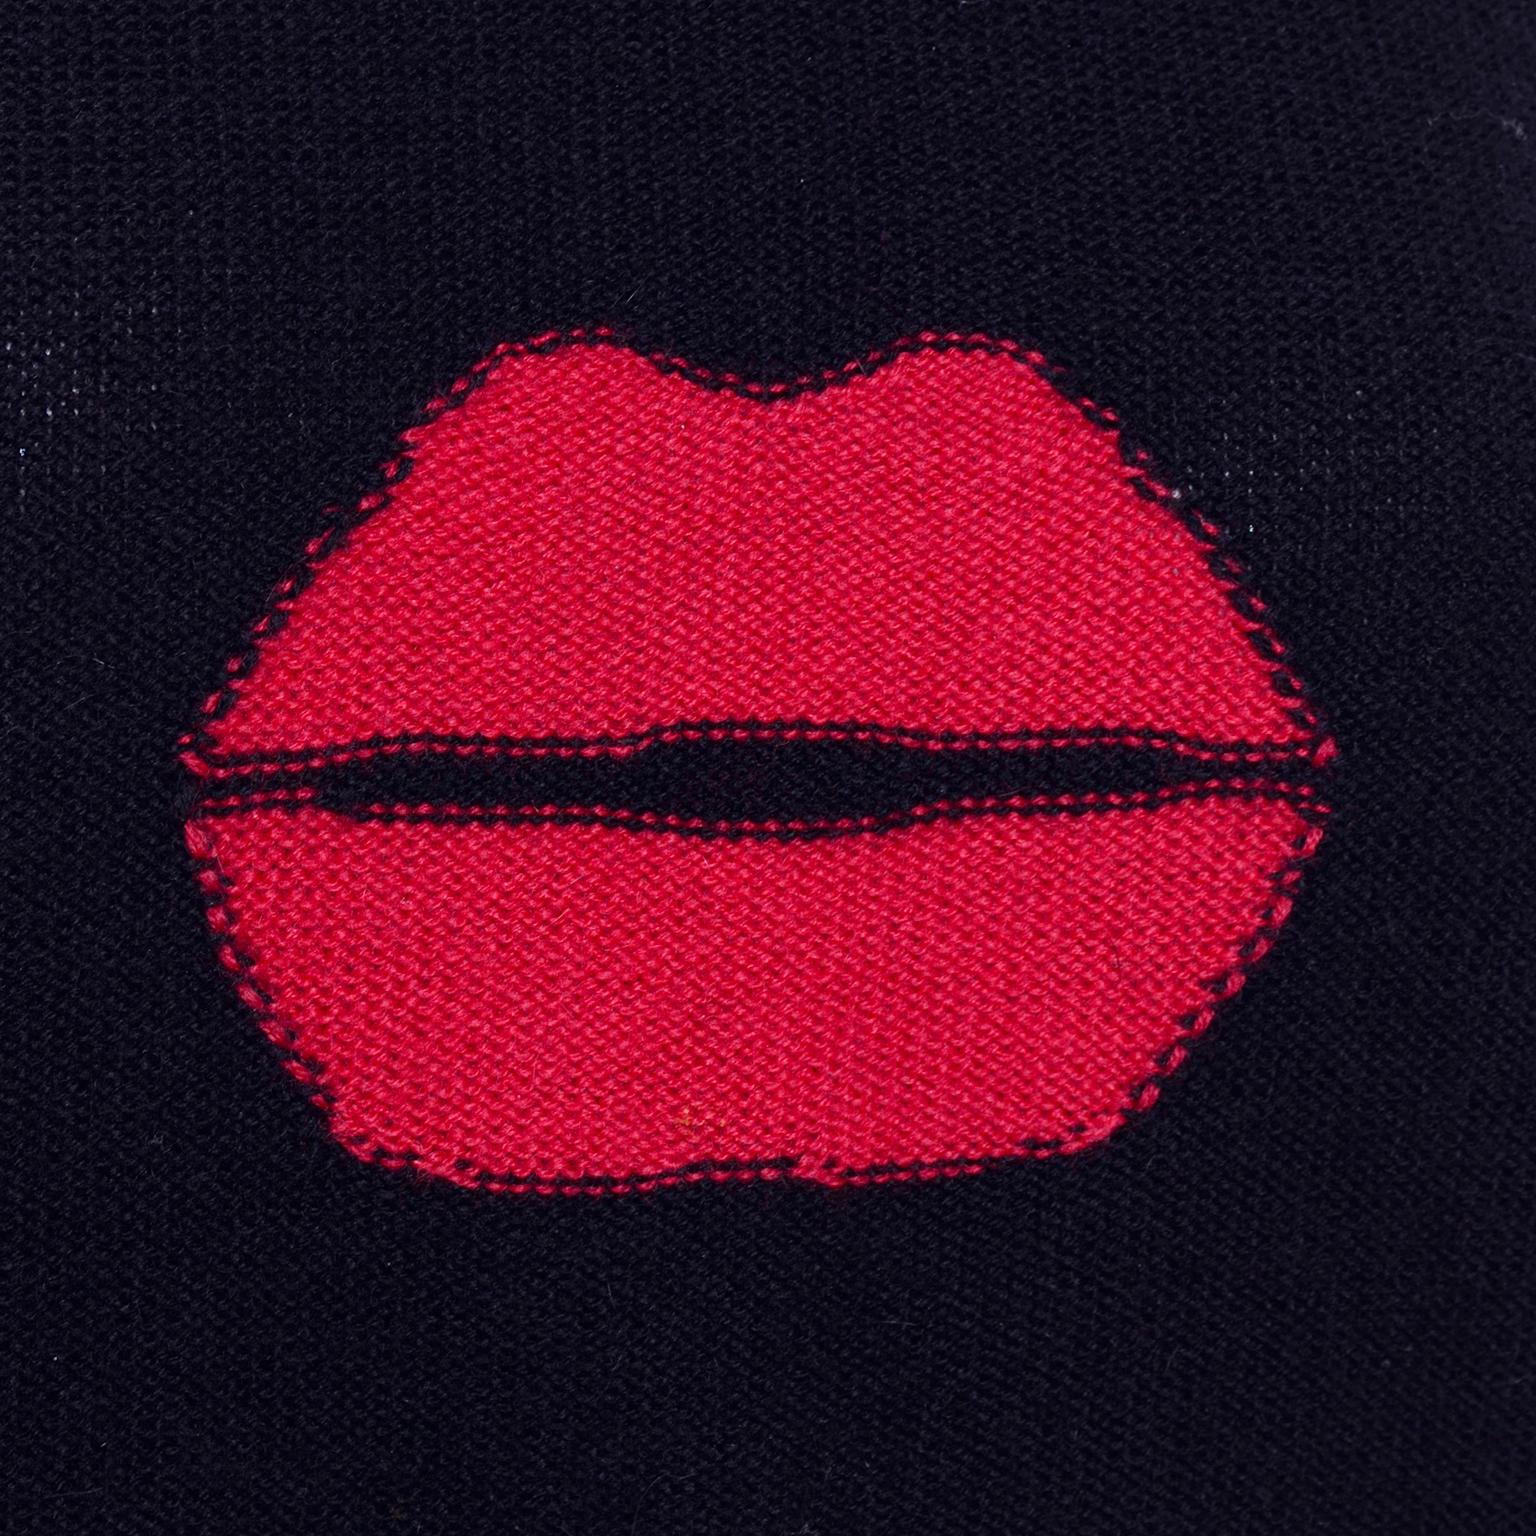 Women's 1980s Sonia Rykiel Vintage Black and Red Kiss Sweater in Angora Wool Blend